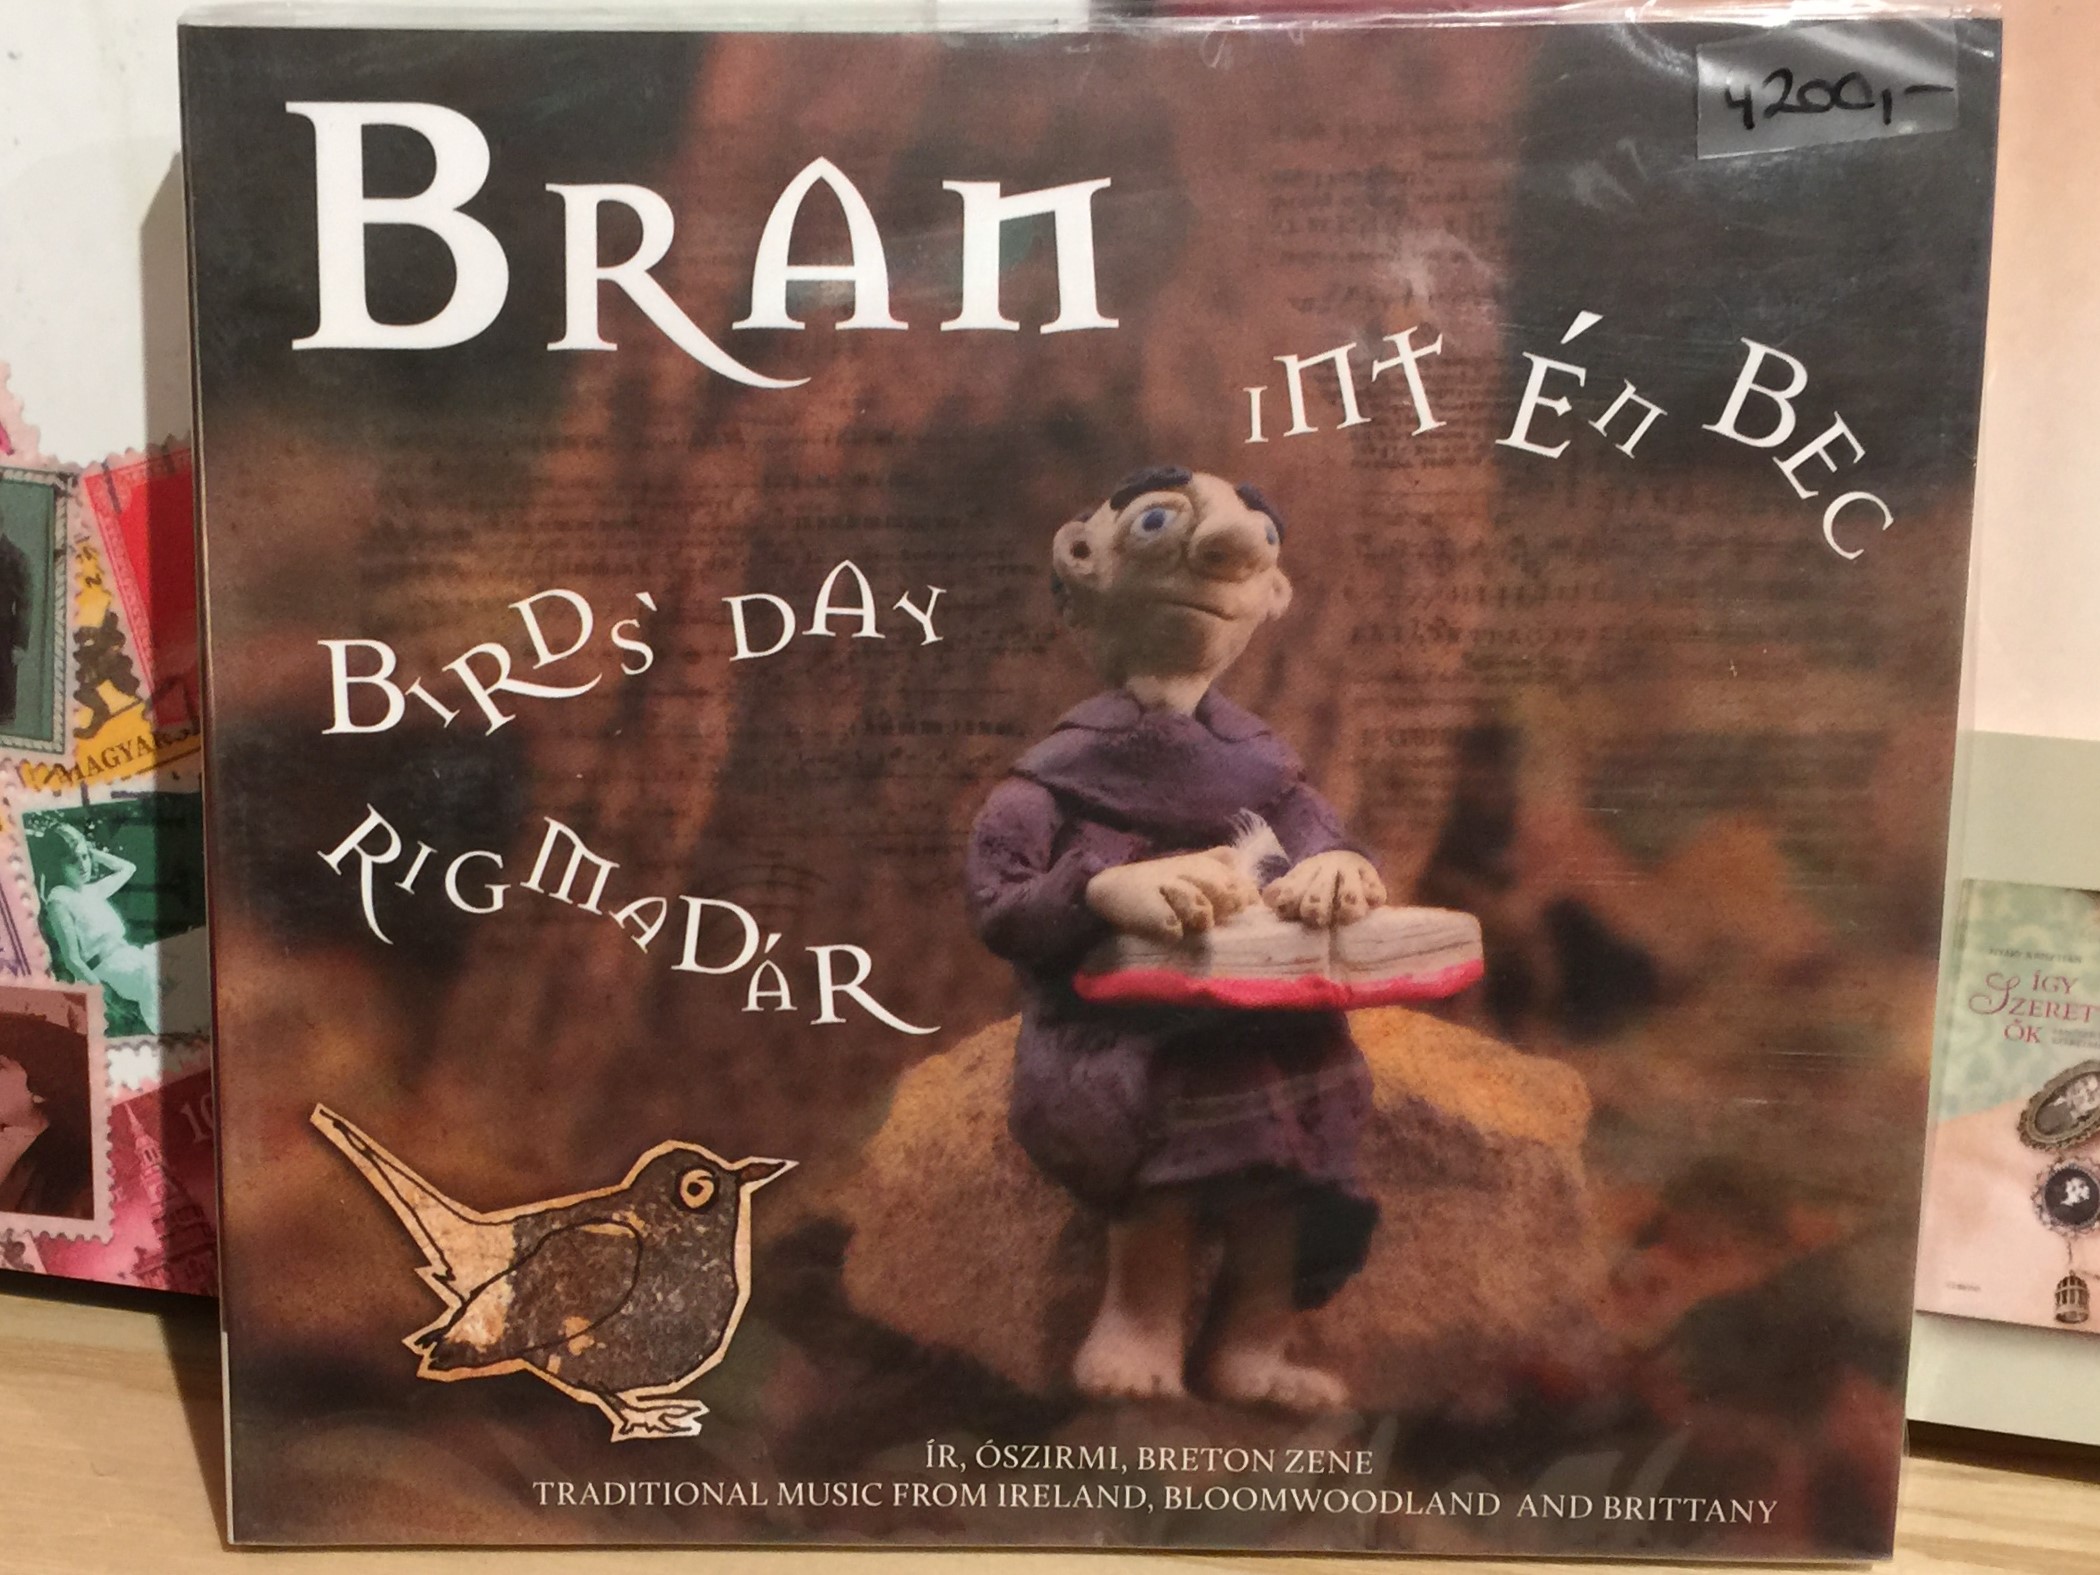 bran-int-en-bec-bird-s-day-rigmadar-traditional-music-from-ireland-bloomwoodland-and-brittany-fono-budai-zenehaz-audio-cd-2011-5998048527021-1-.jpg